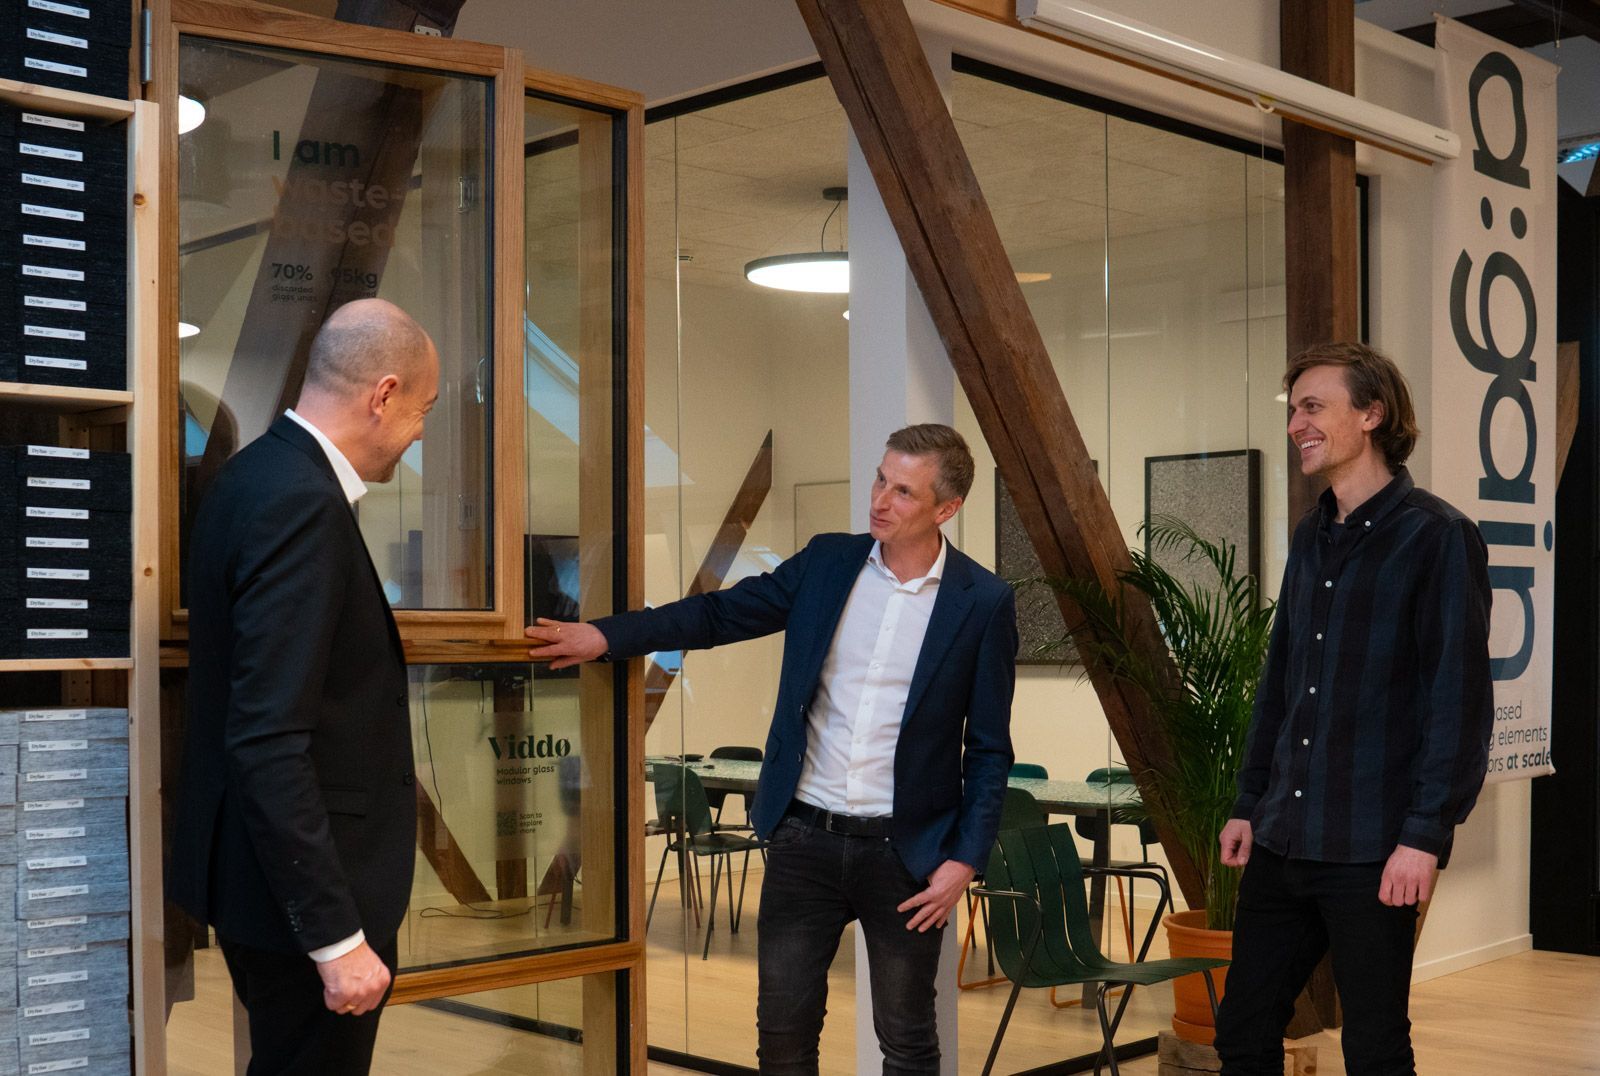 Magnus Heunicke visits the office